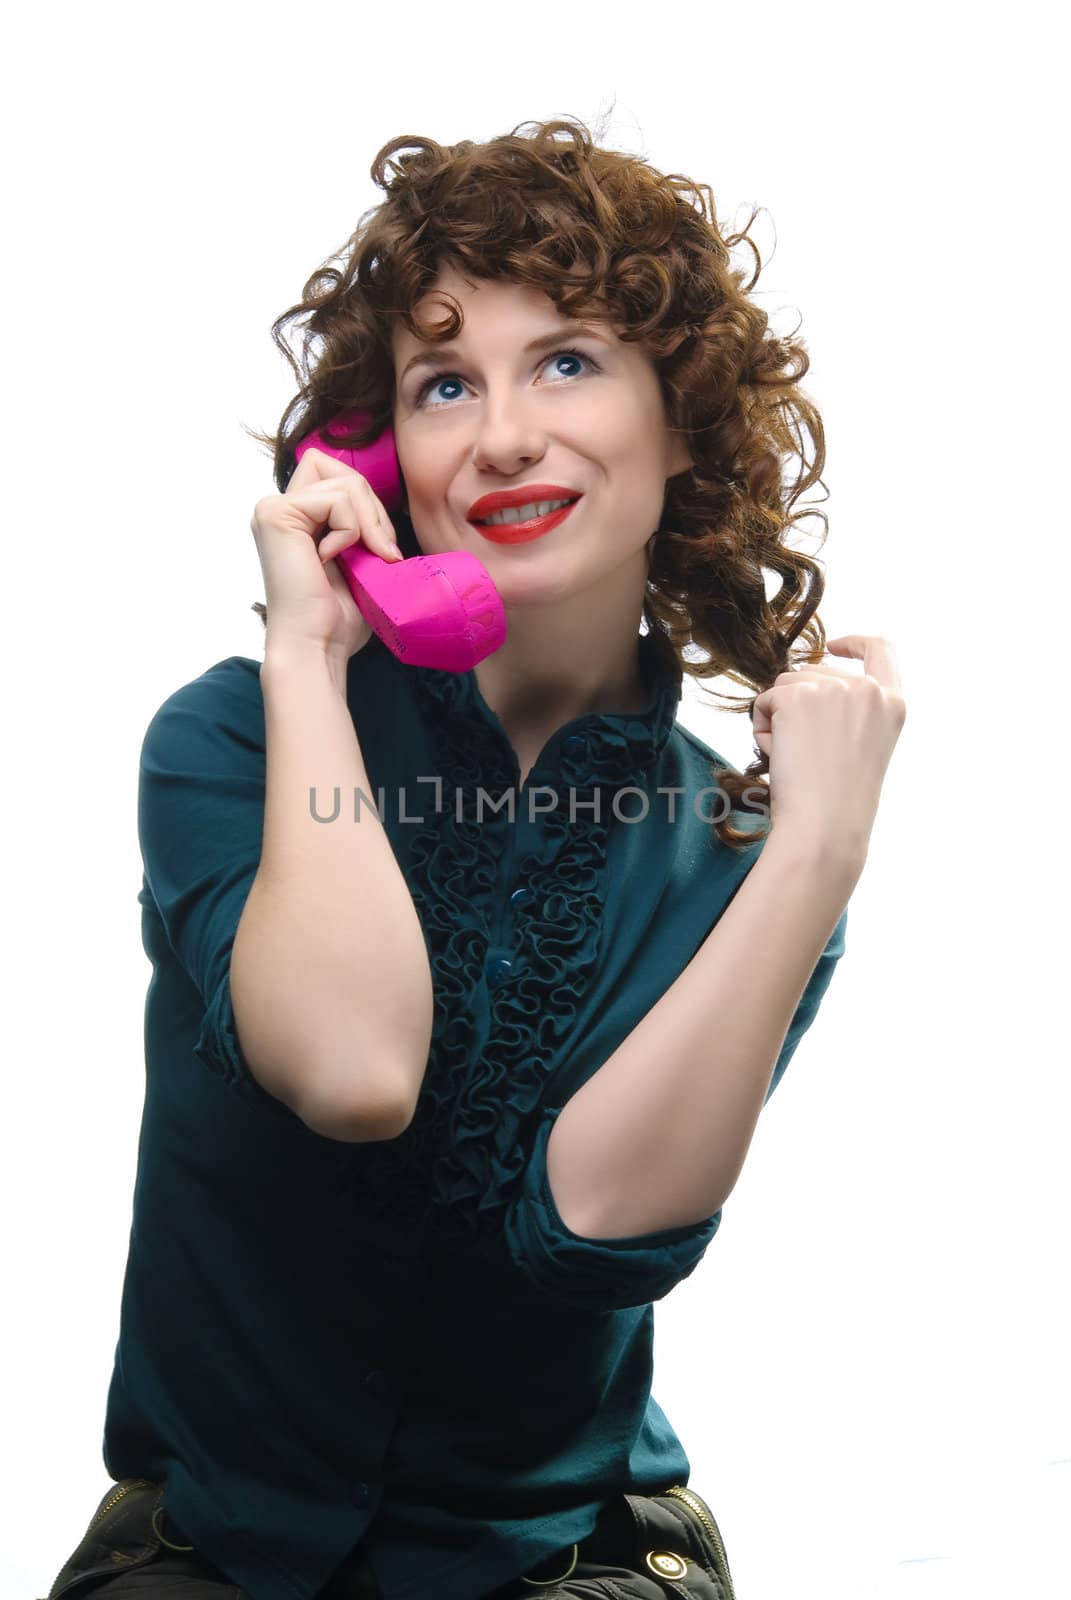 Young woman holding handset by kirs-ua